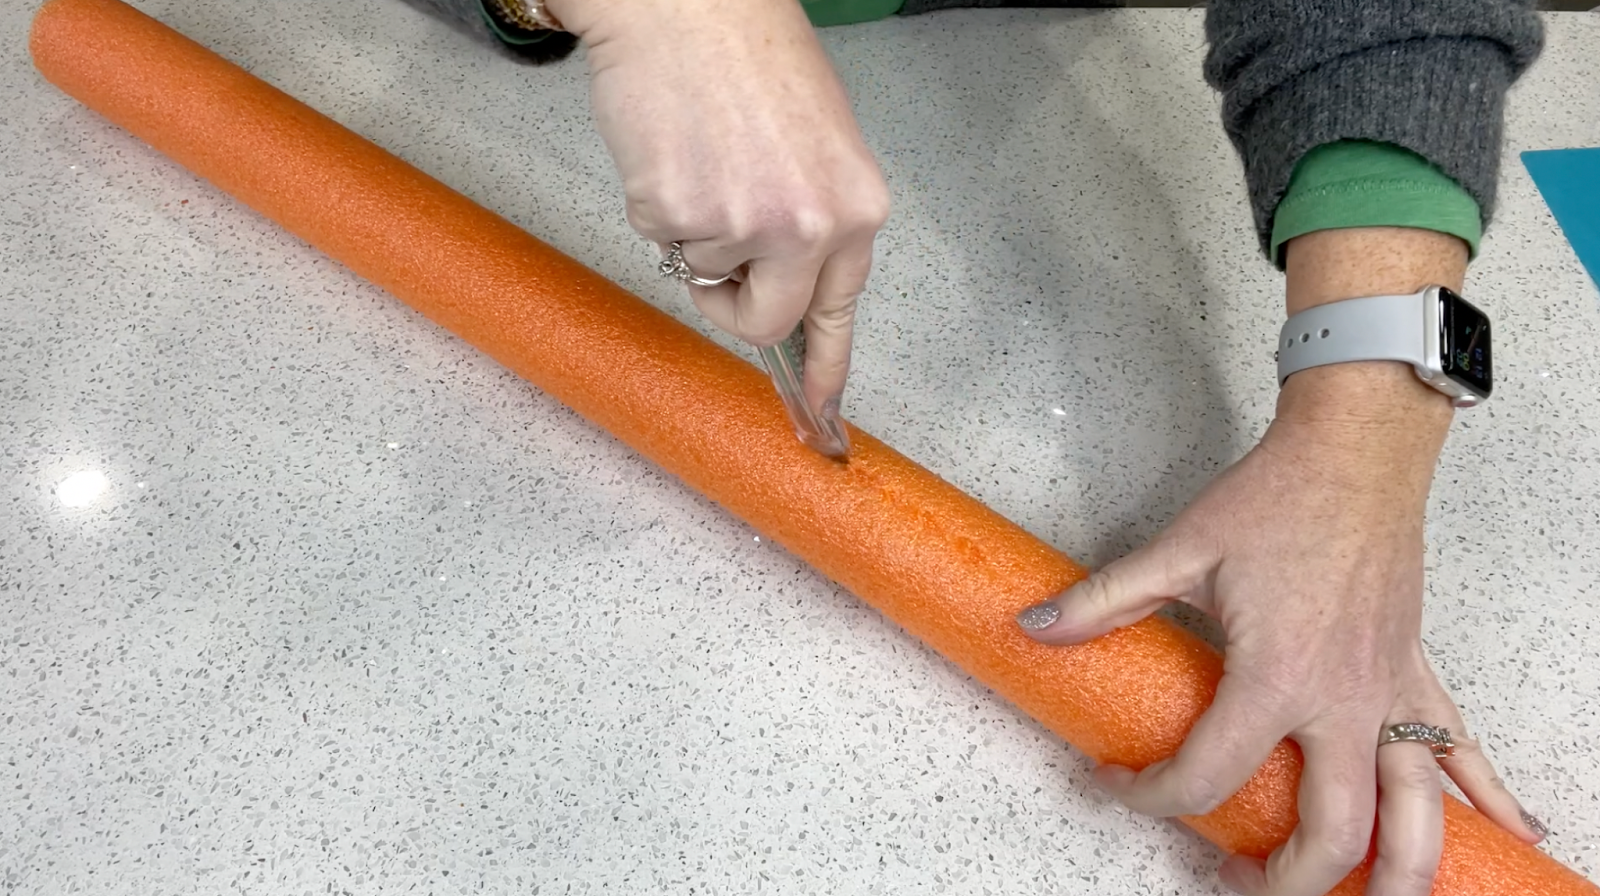 Lindsay cutting an orange pool noodle in half length-wise using a box cutter